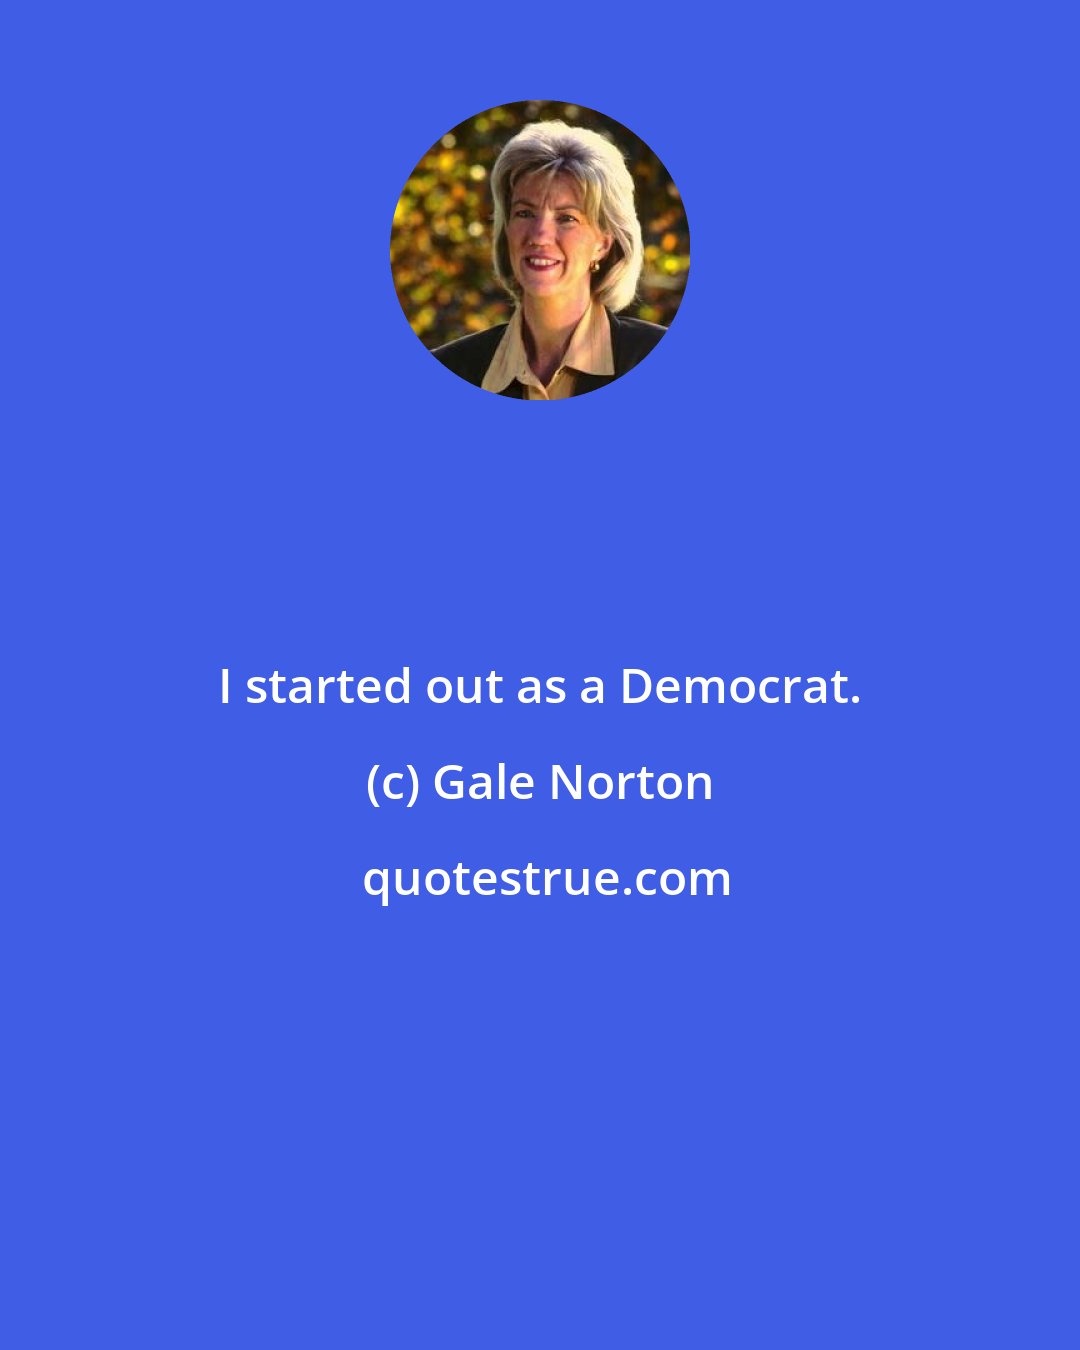 Gale Norton: I started out as a Democrat.